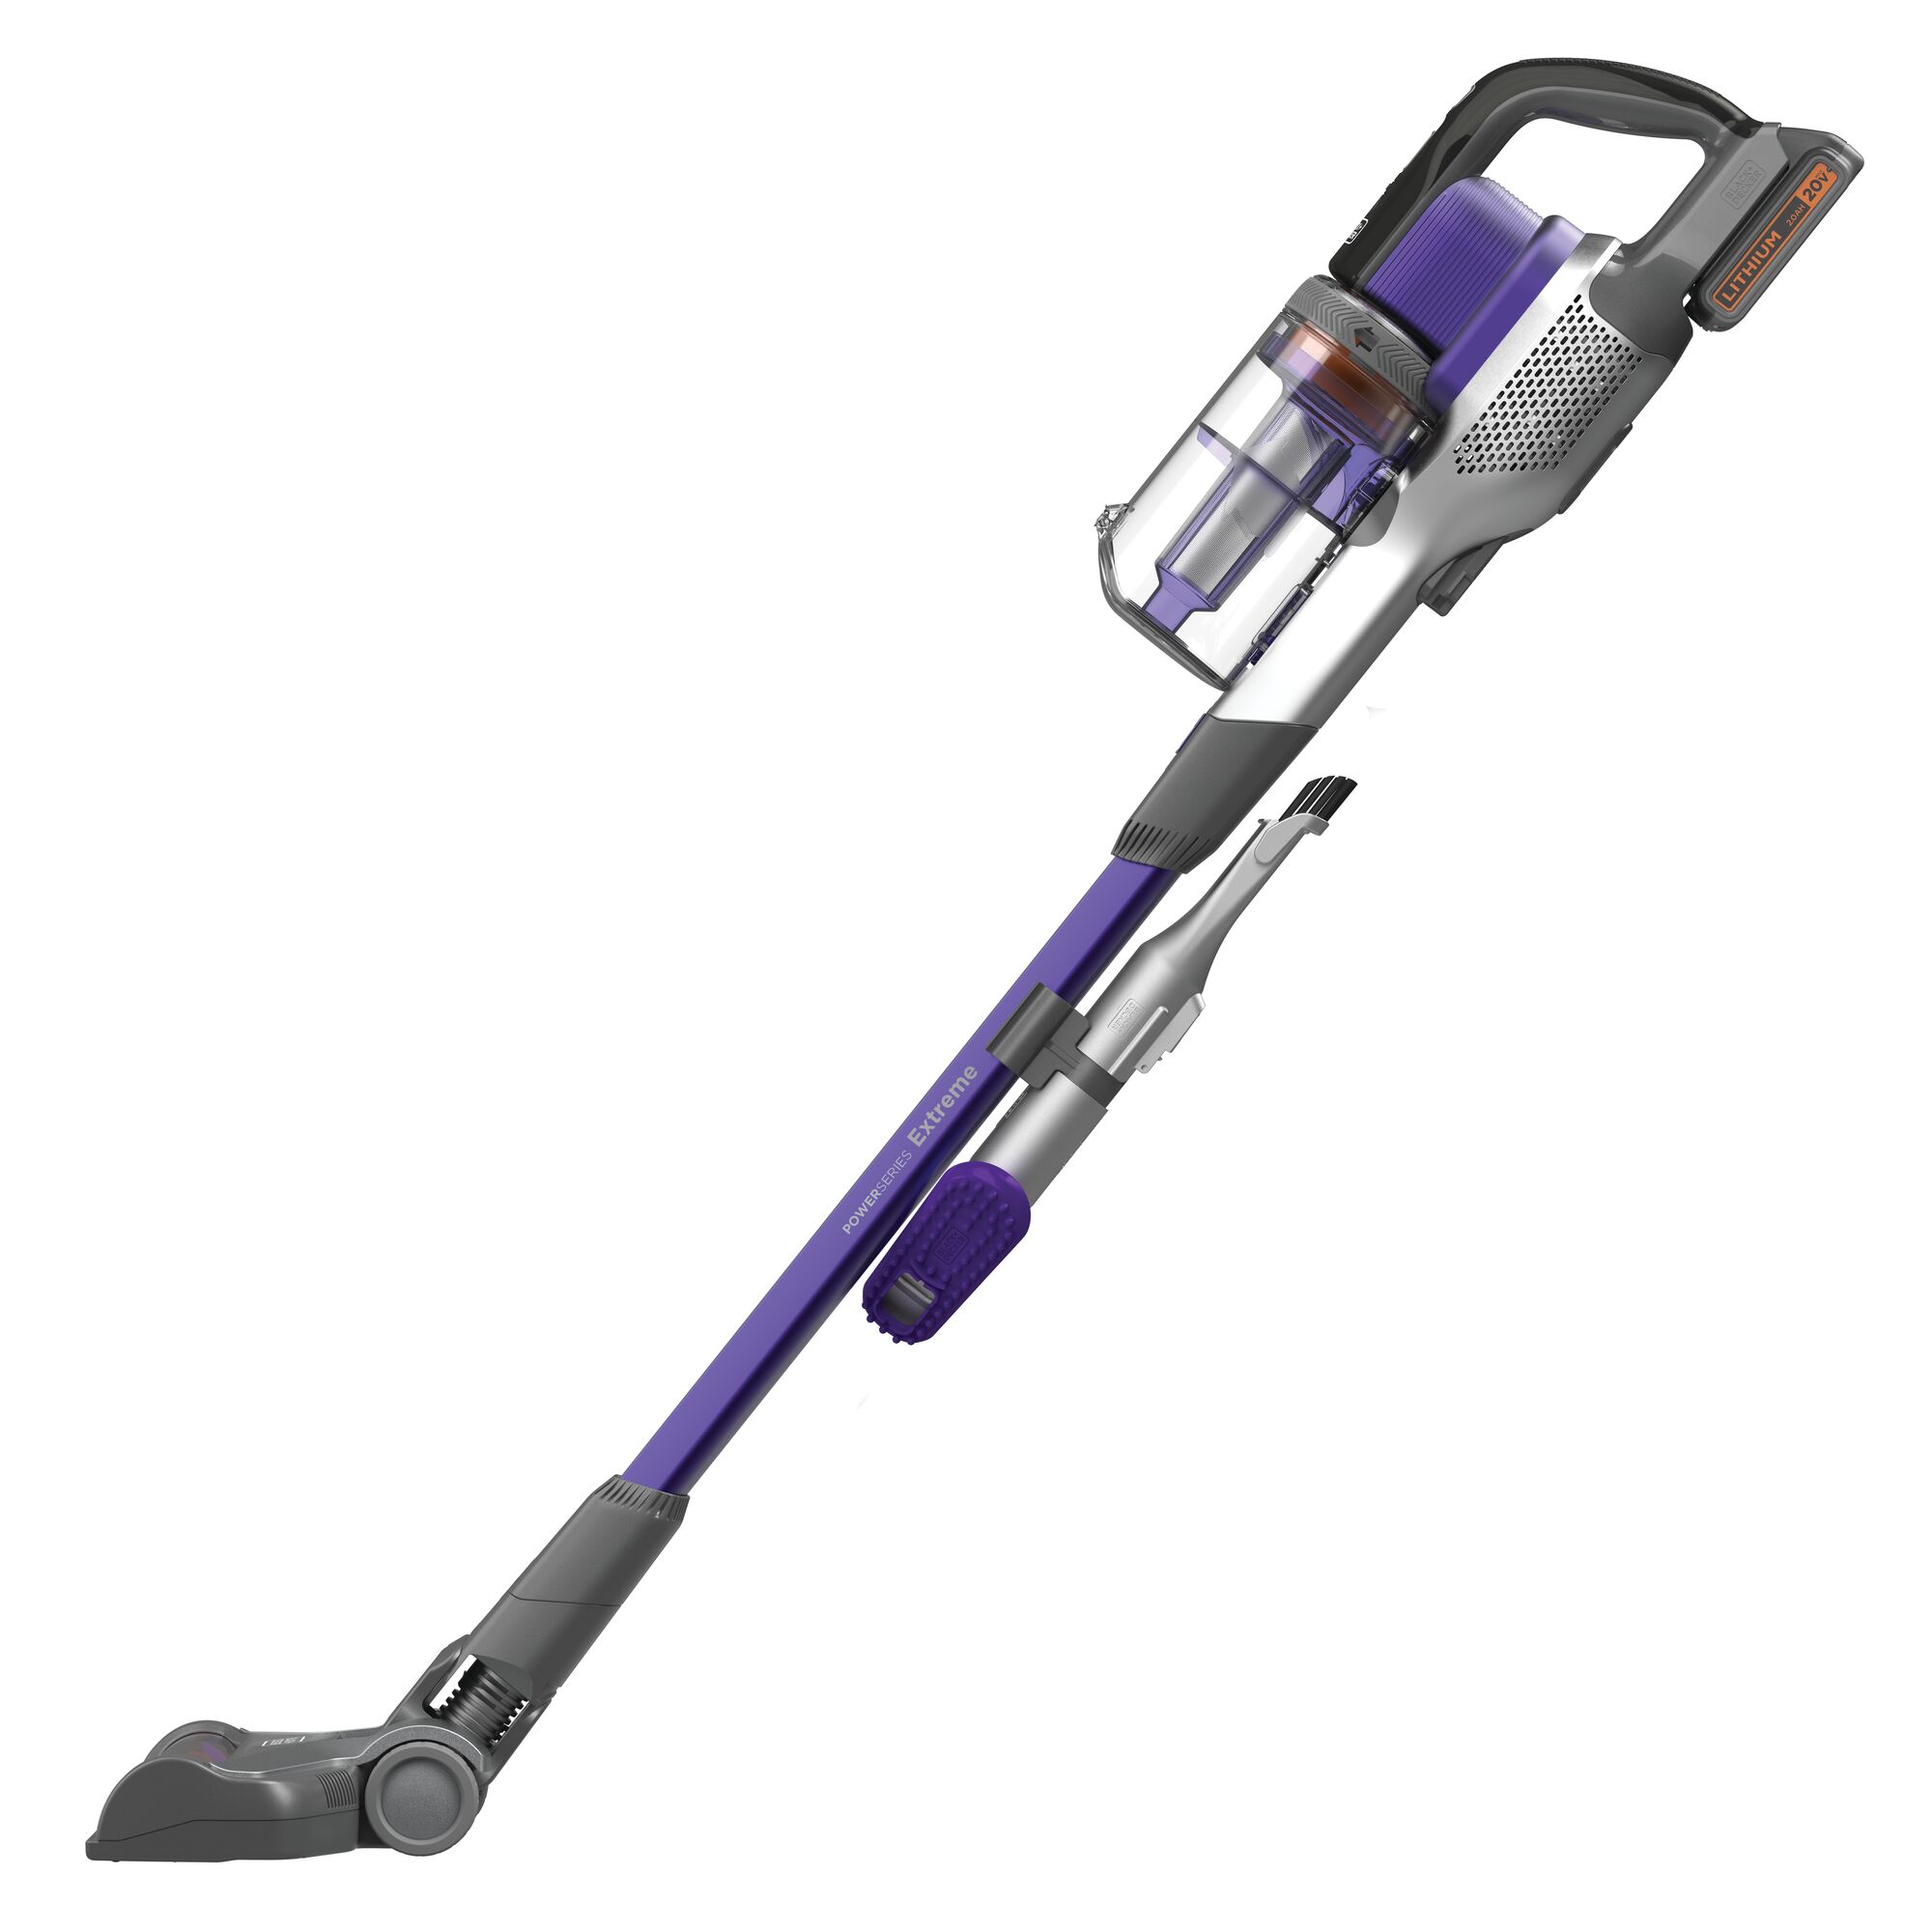 Review: The Black+Decker Powerseries Extreme Is an Affordable Dyson  Alternative